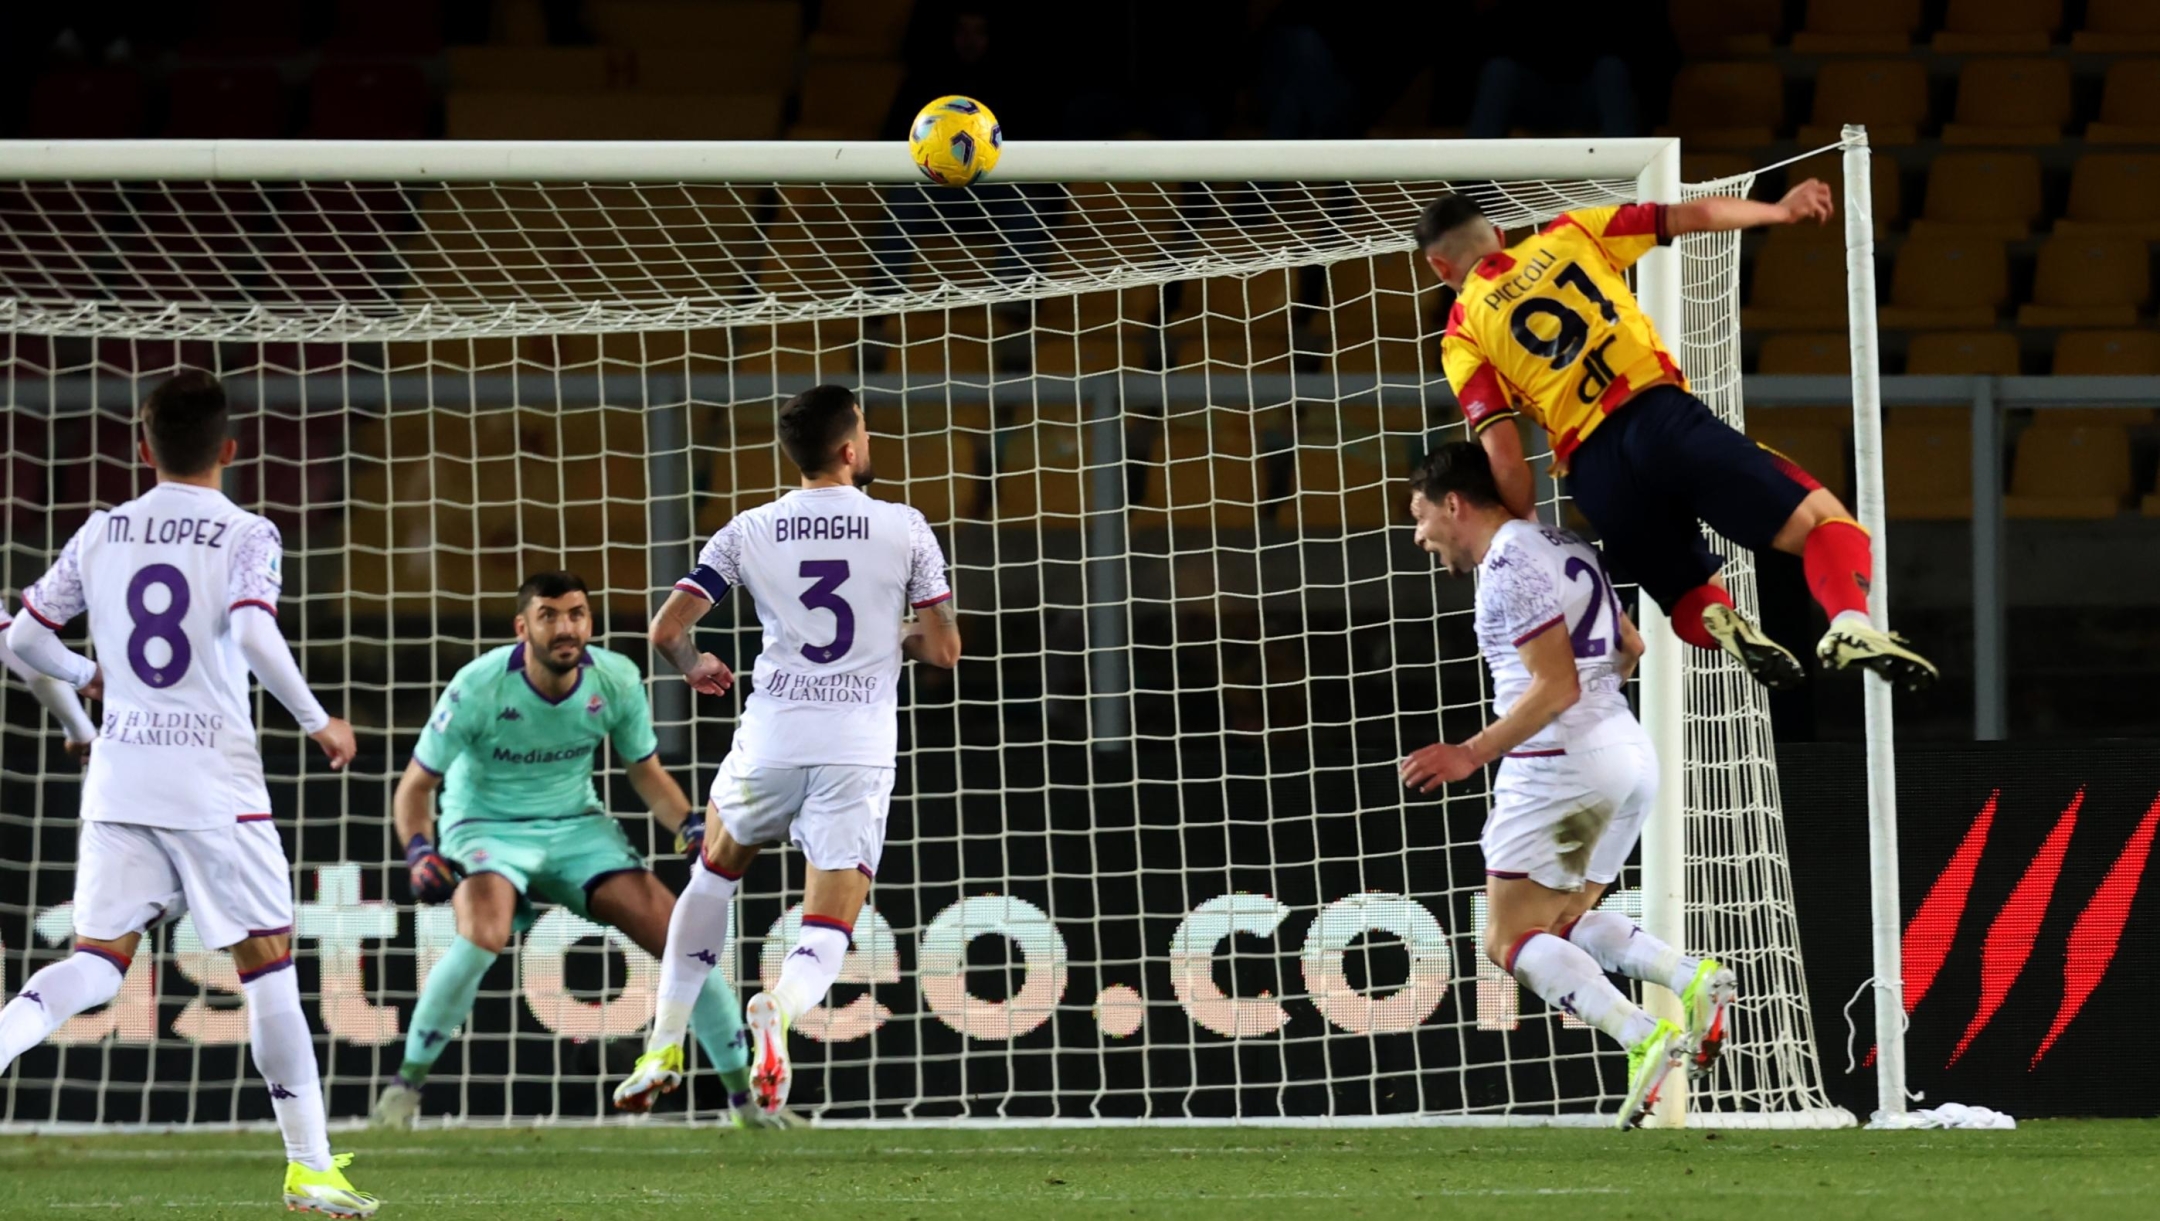 LECCE, ITALY - FEBRUARY 02: Roberto Piccoli of Lecce scores his team's second goal during the Serie A TIM match between US Lecce and ACF Fiorentina at Stadio Via del Mare on February 02, 2024 in Lecce, Italy. (Photo by Maurizio Lagana/Getty Images)